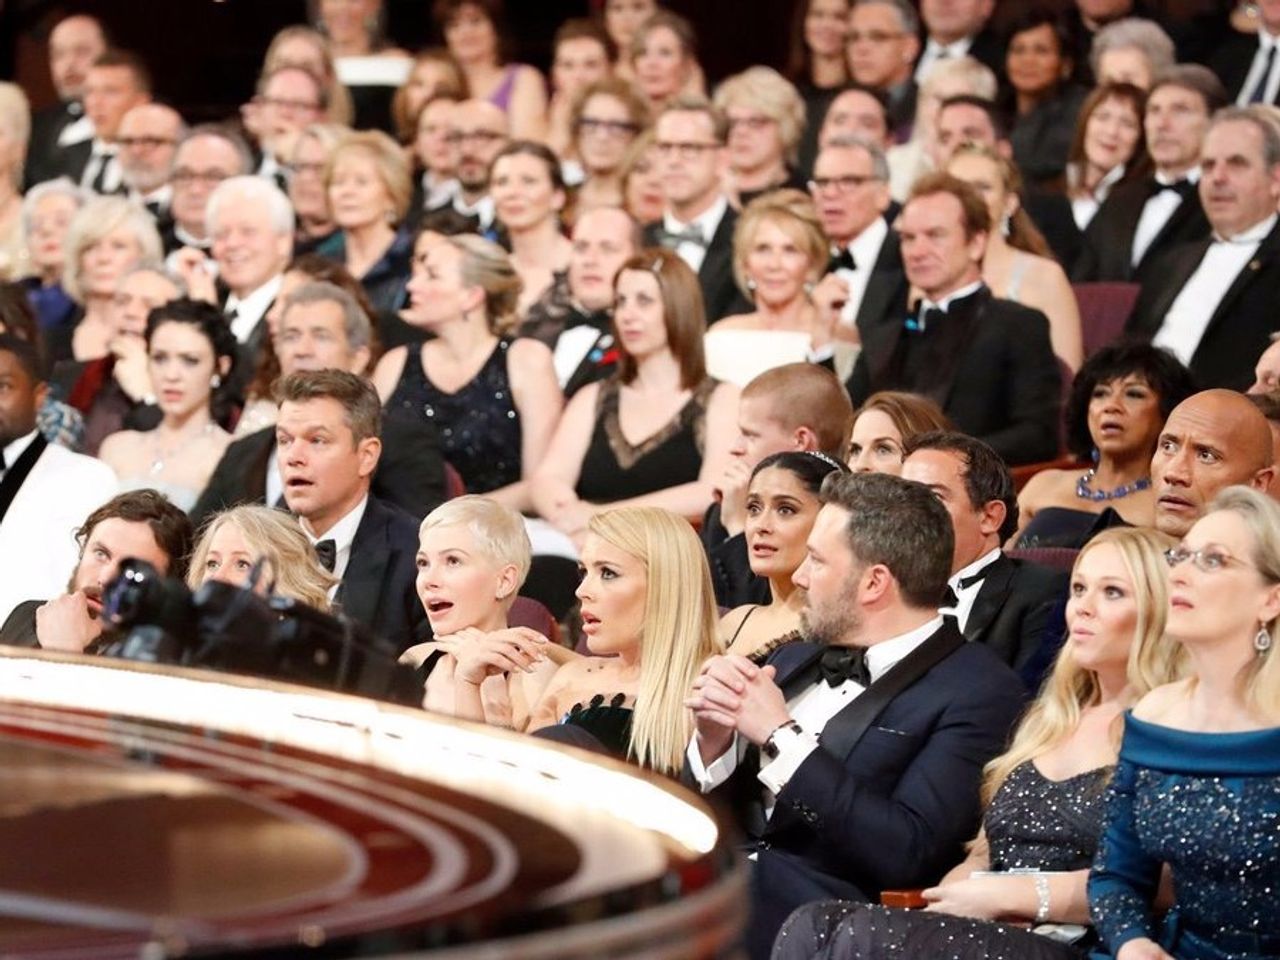 one-photo-sums-up-the-baffled-audience-reaction-to-the-big-oscars-best-picture-screw-up